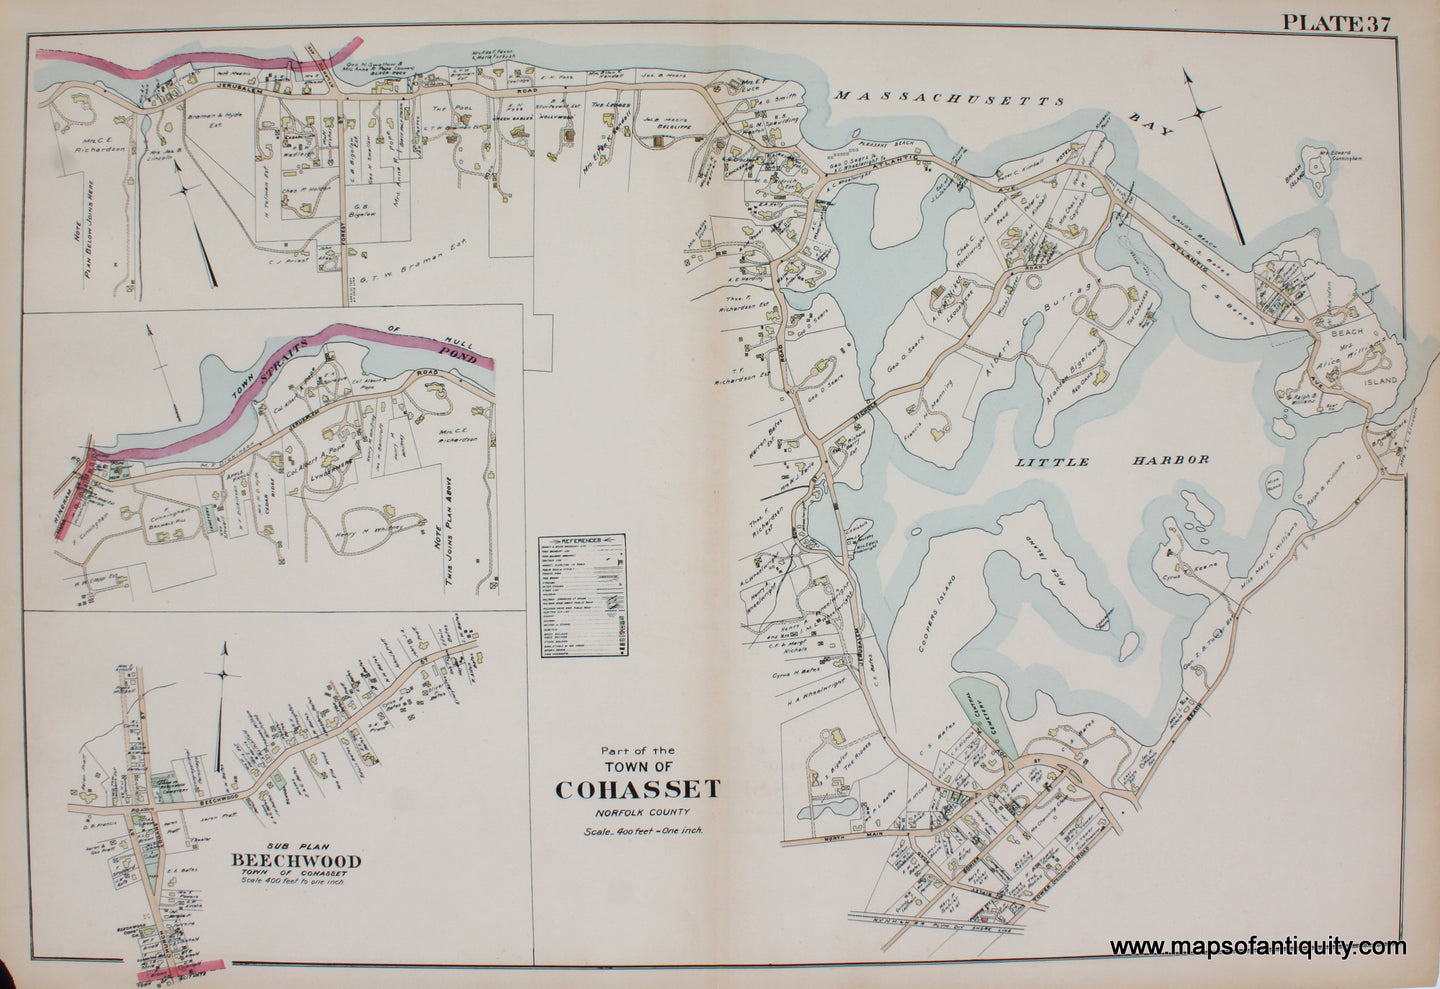 Reproduction-Part-of-the-Town-of-Cohasset-with-the-sub-plan-of-Beechwood---Reproduction---Reproductions---Non-Cape-Cod-New-England-1903-Richards-Maps-Of-Antiquity